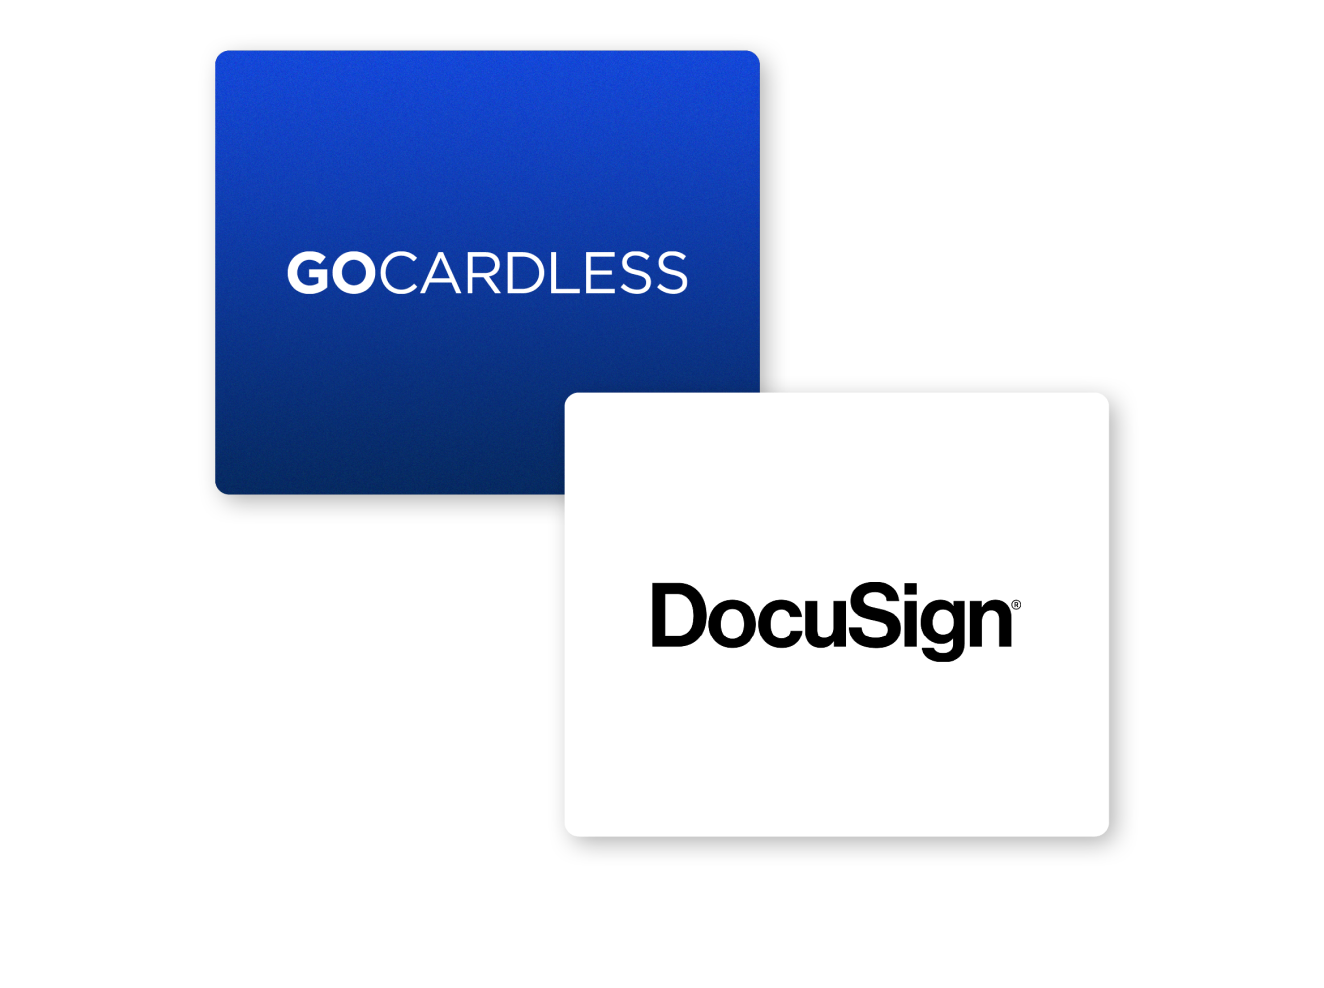 DocuSign improves conversions by 10%